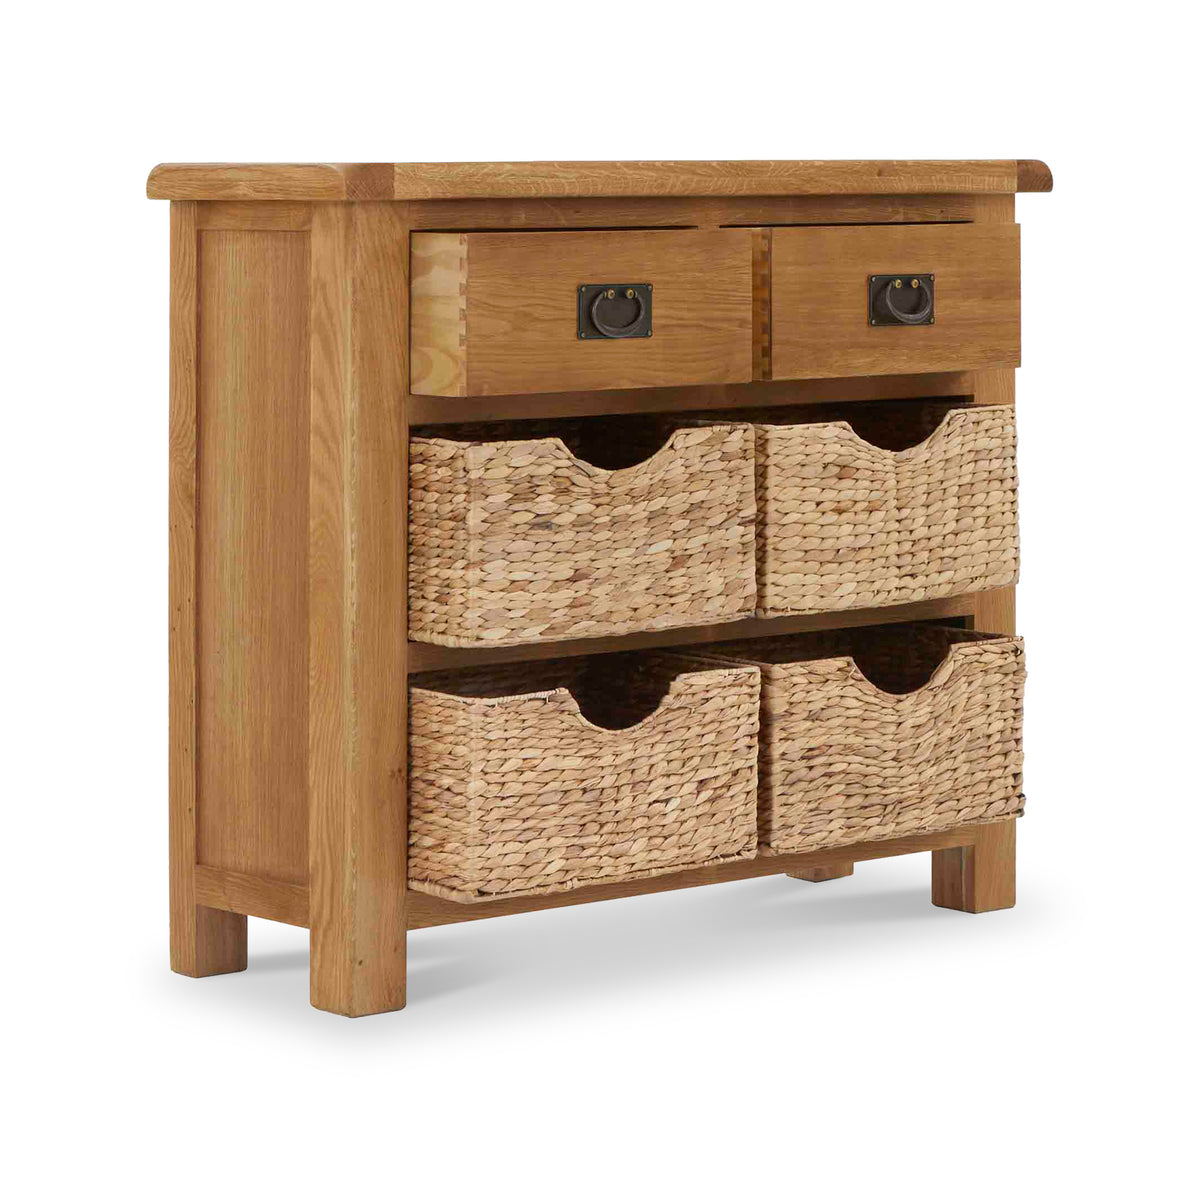 Zelah Oak Small Sideboard with Baskets from Roseland Furniture